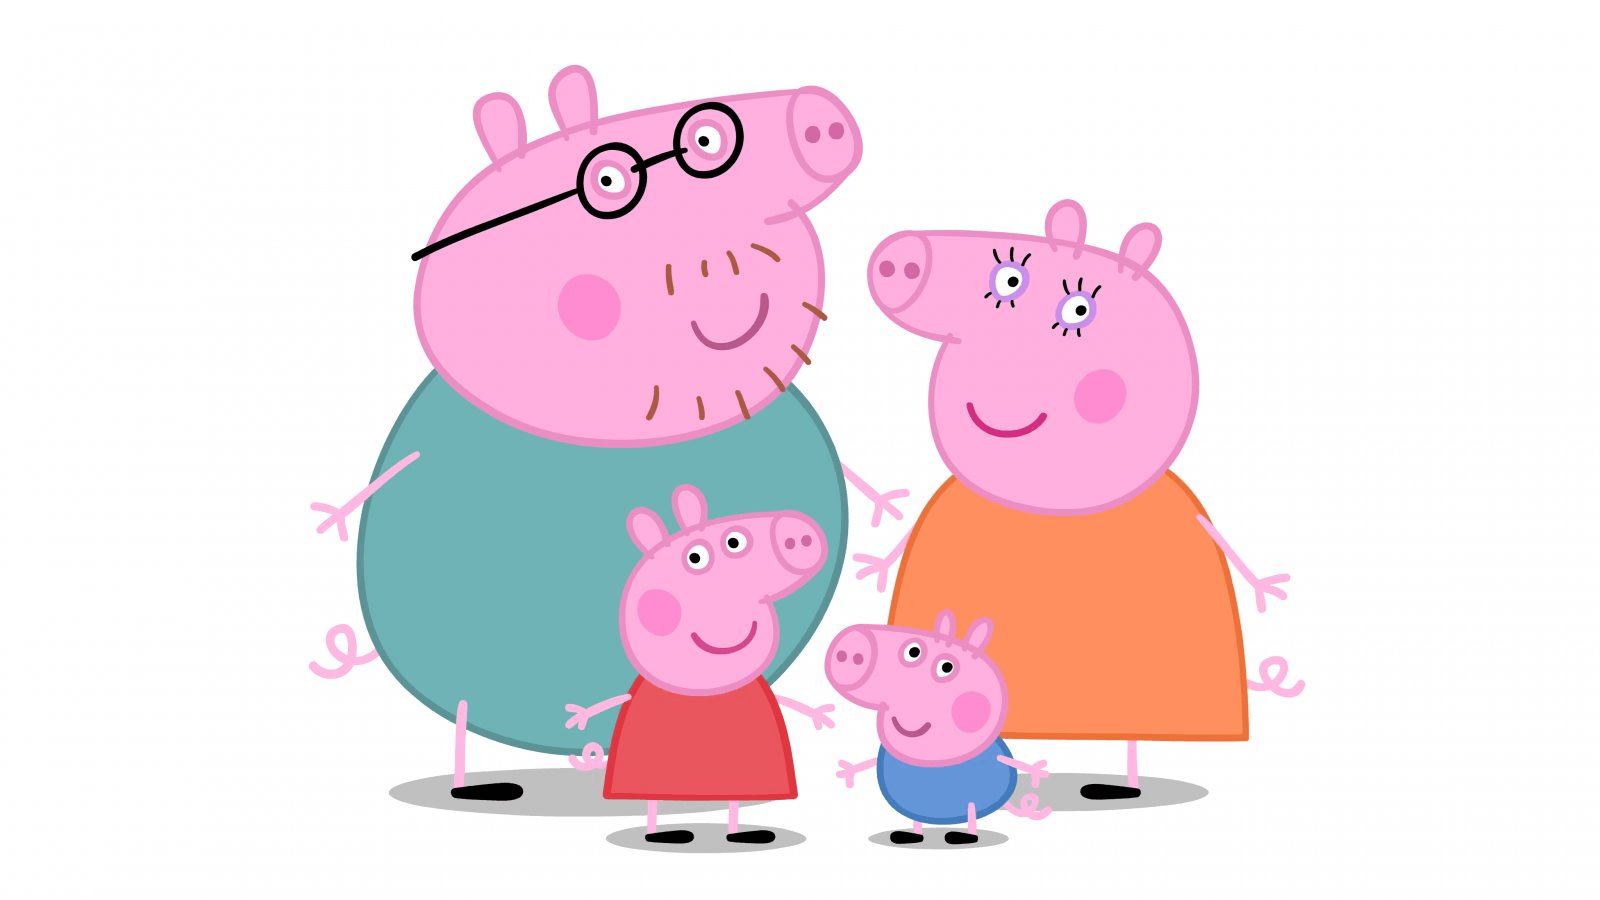 Peppa Pig Family Wallpapers